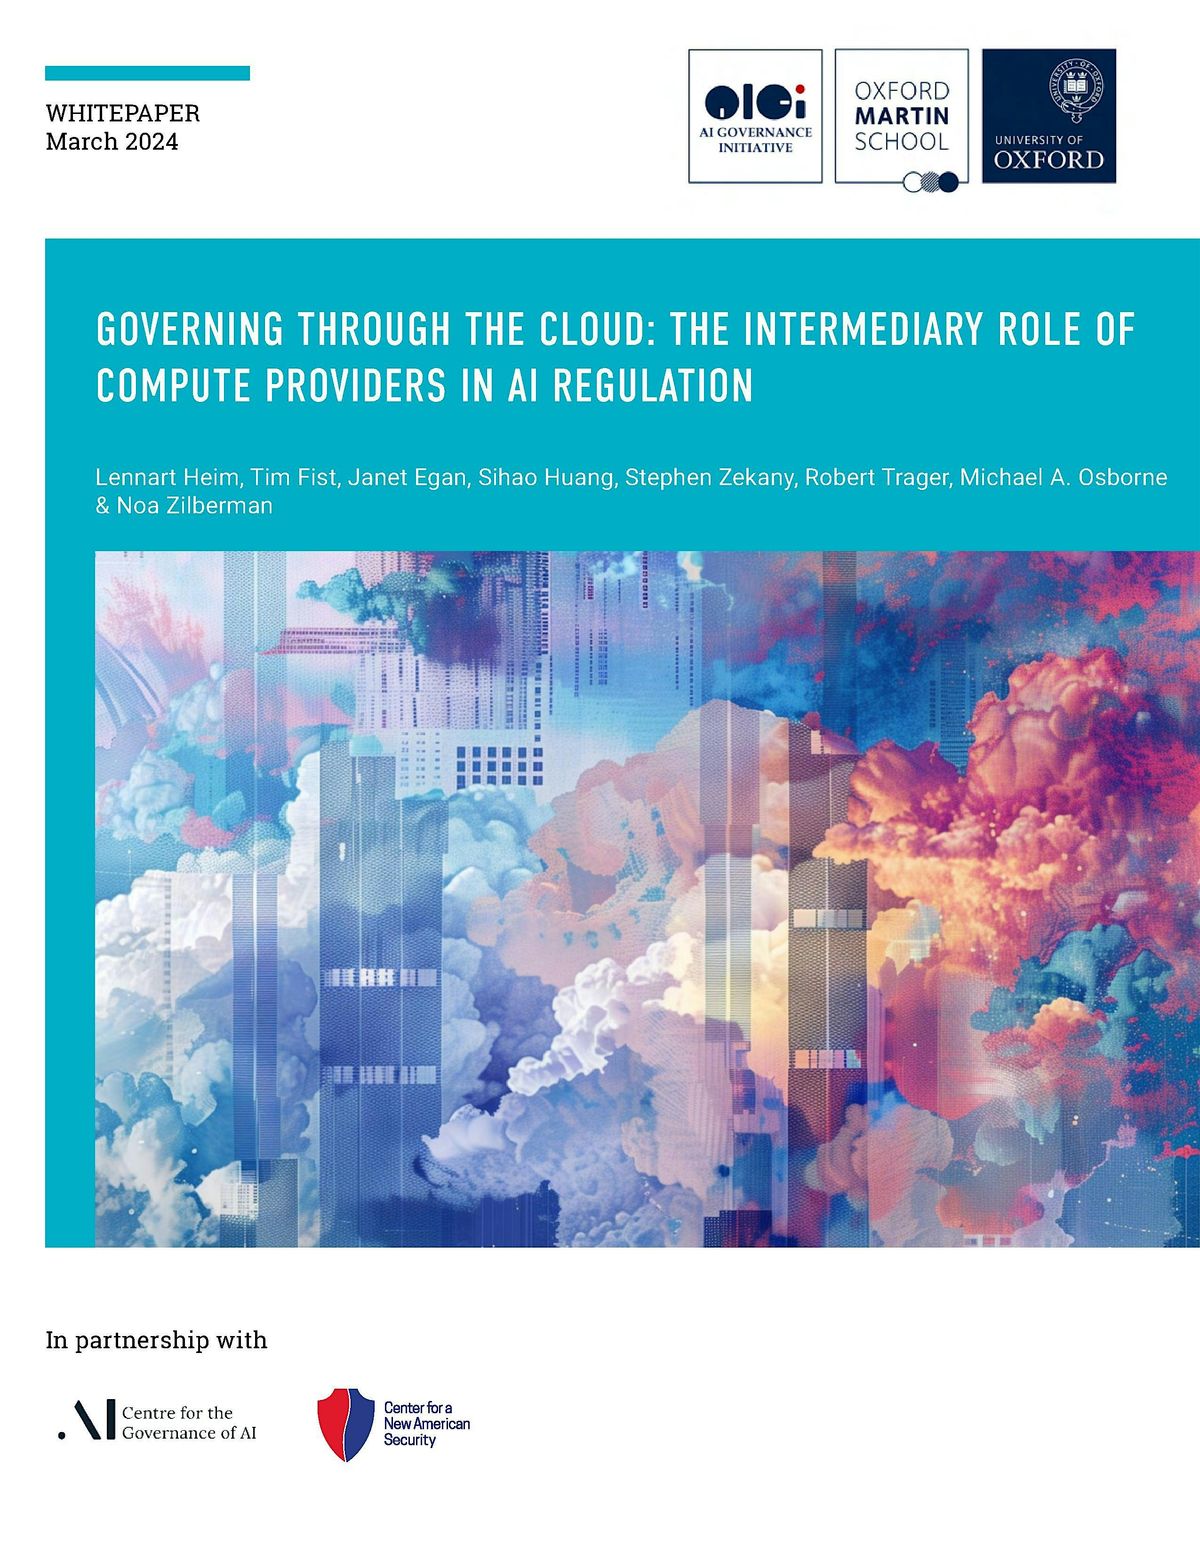 Governing Through the Cloud: The Role of Compute Providers in AI Regulation